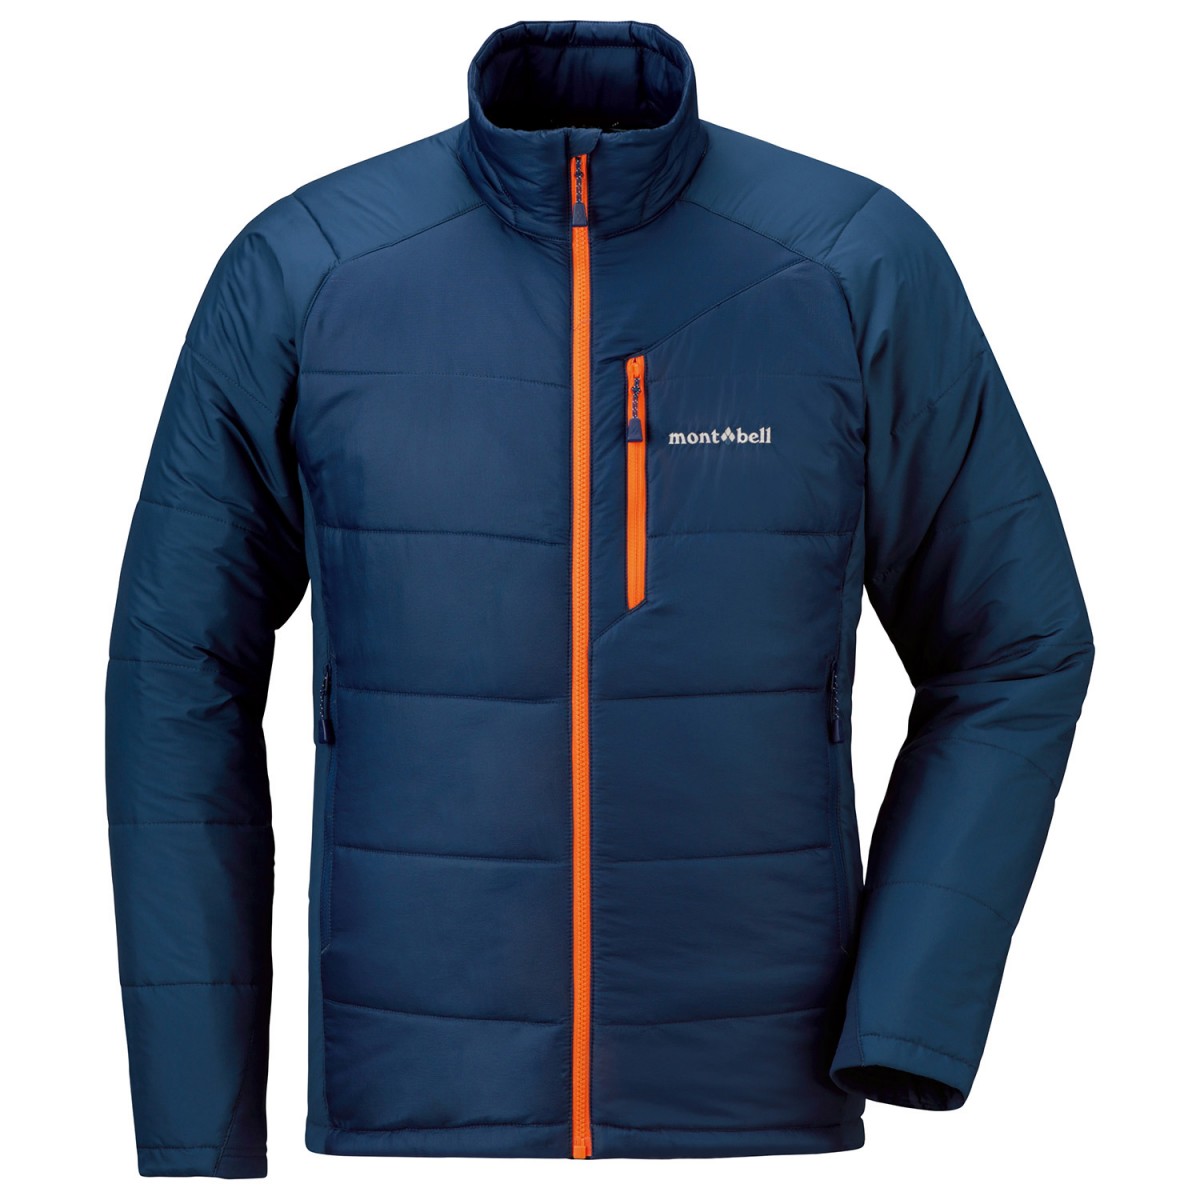 Montbell UL Thermawrap Jacket Review (The Montbell UL Thermawrap jacket - updated for the 2016 season.)